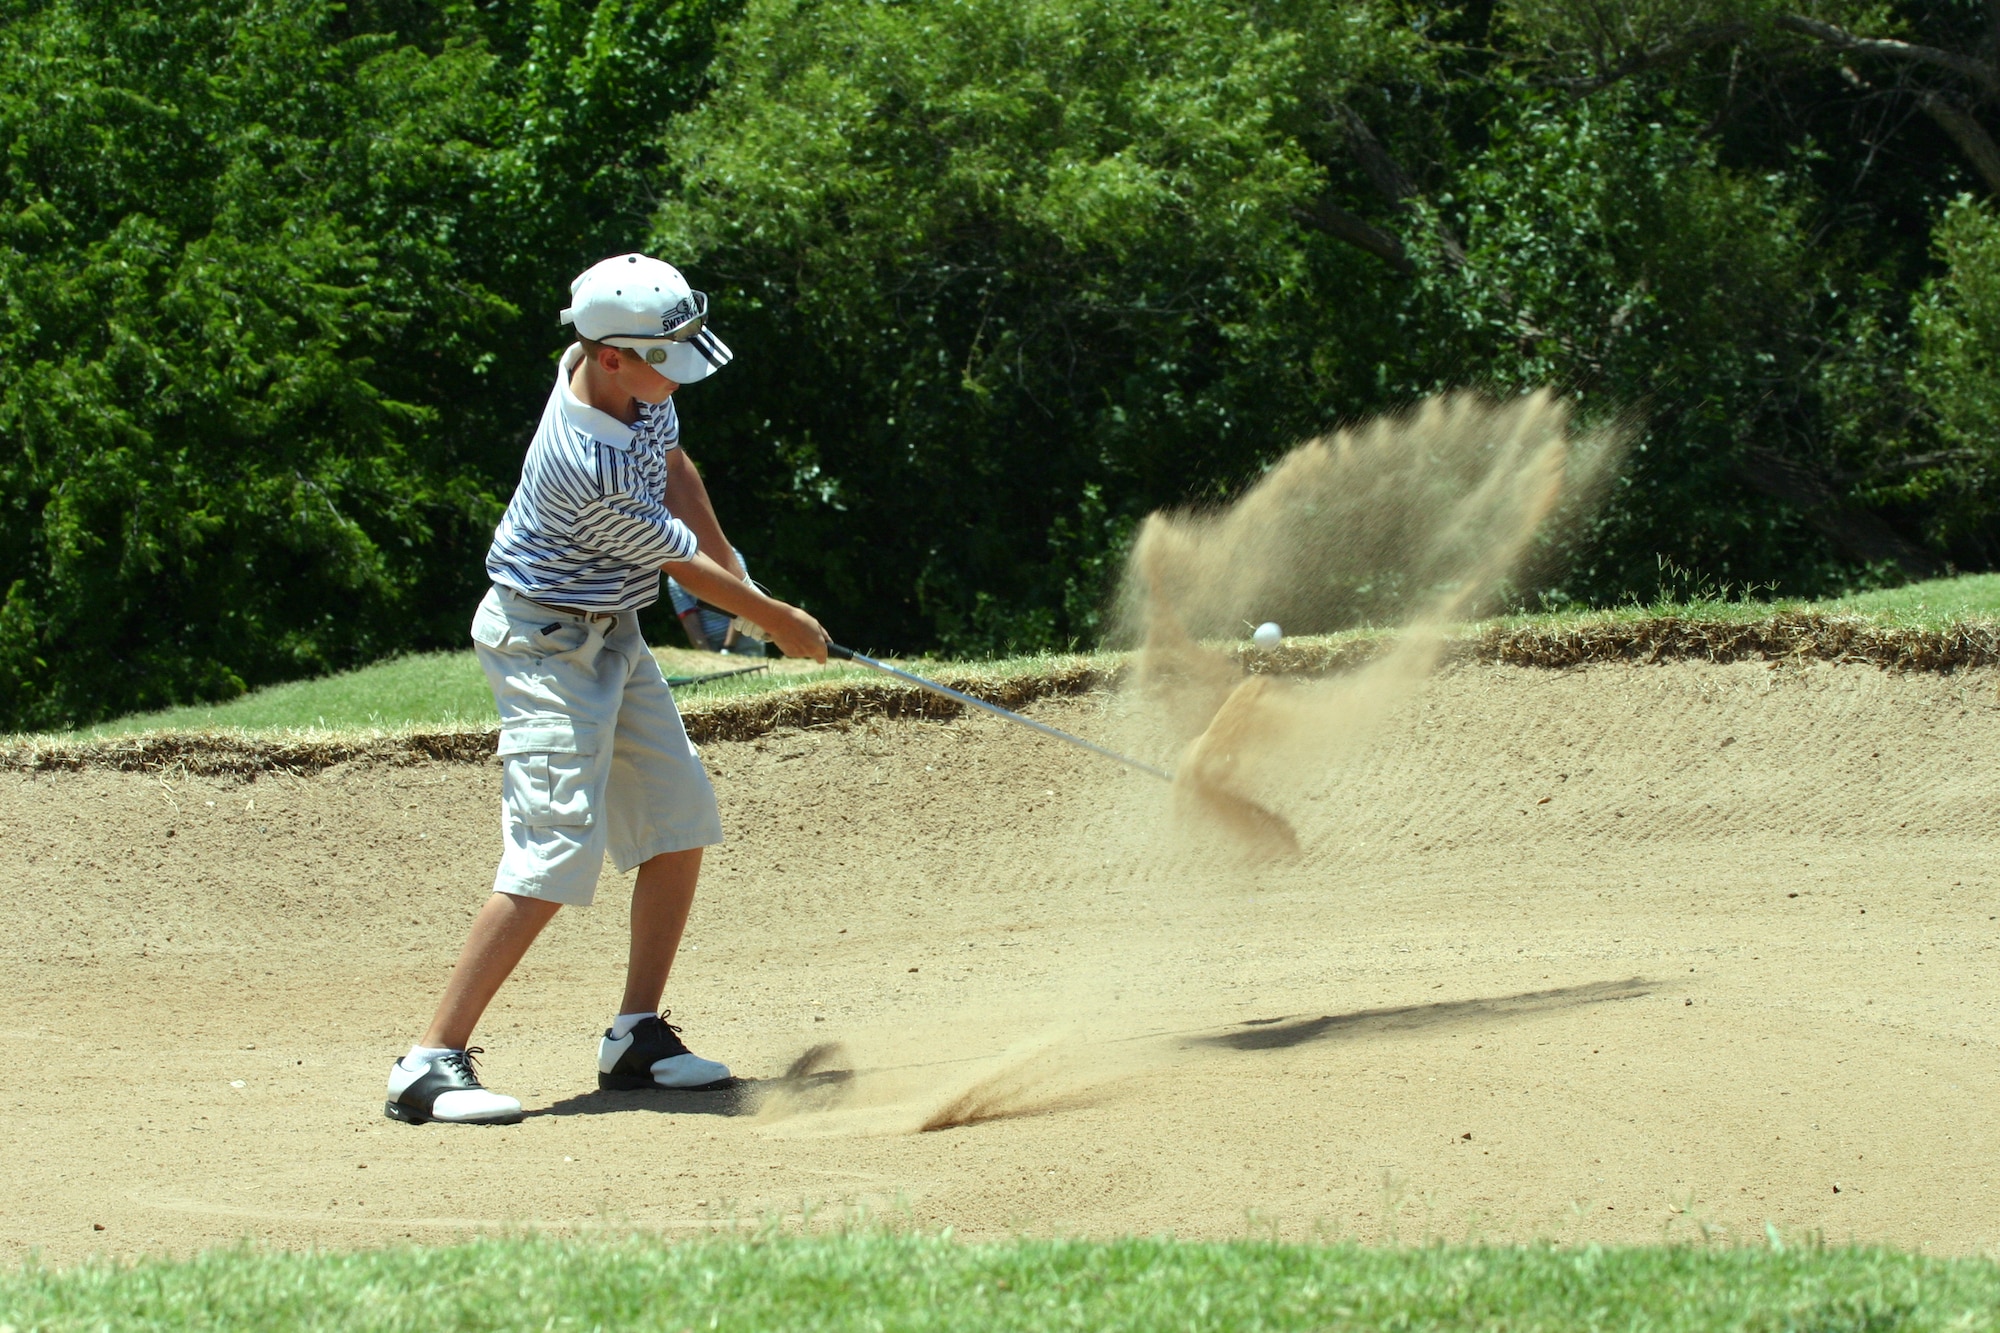 Taylor Schoppa, 12 years old, pitches out of a sand trap during the Texas-Oklahoma Junior Golf Tournament at Wind Creek Golf Course Monday. Schoppa said he came out to the tournament to see how he would play against other competitors.  (U.S. Air Force photo/Airman Jacob Corbin).